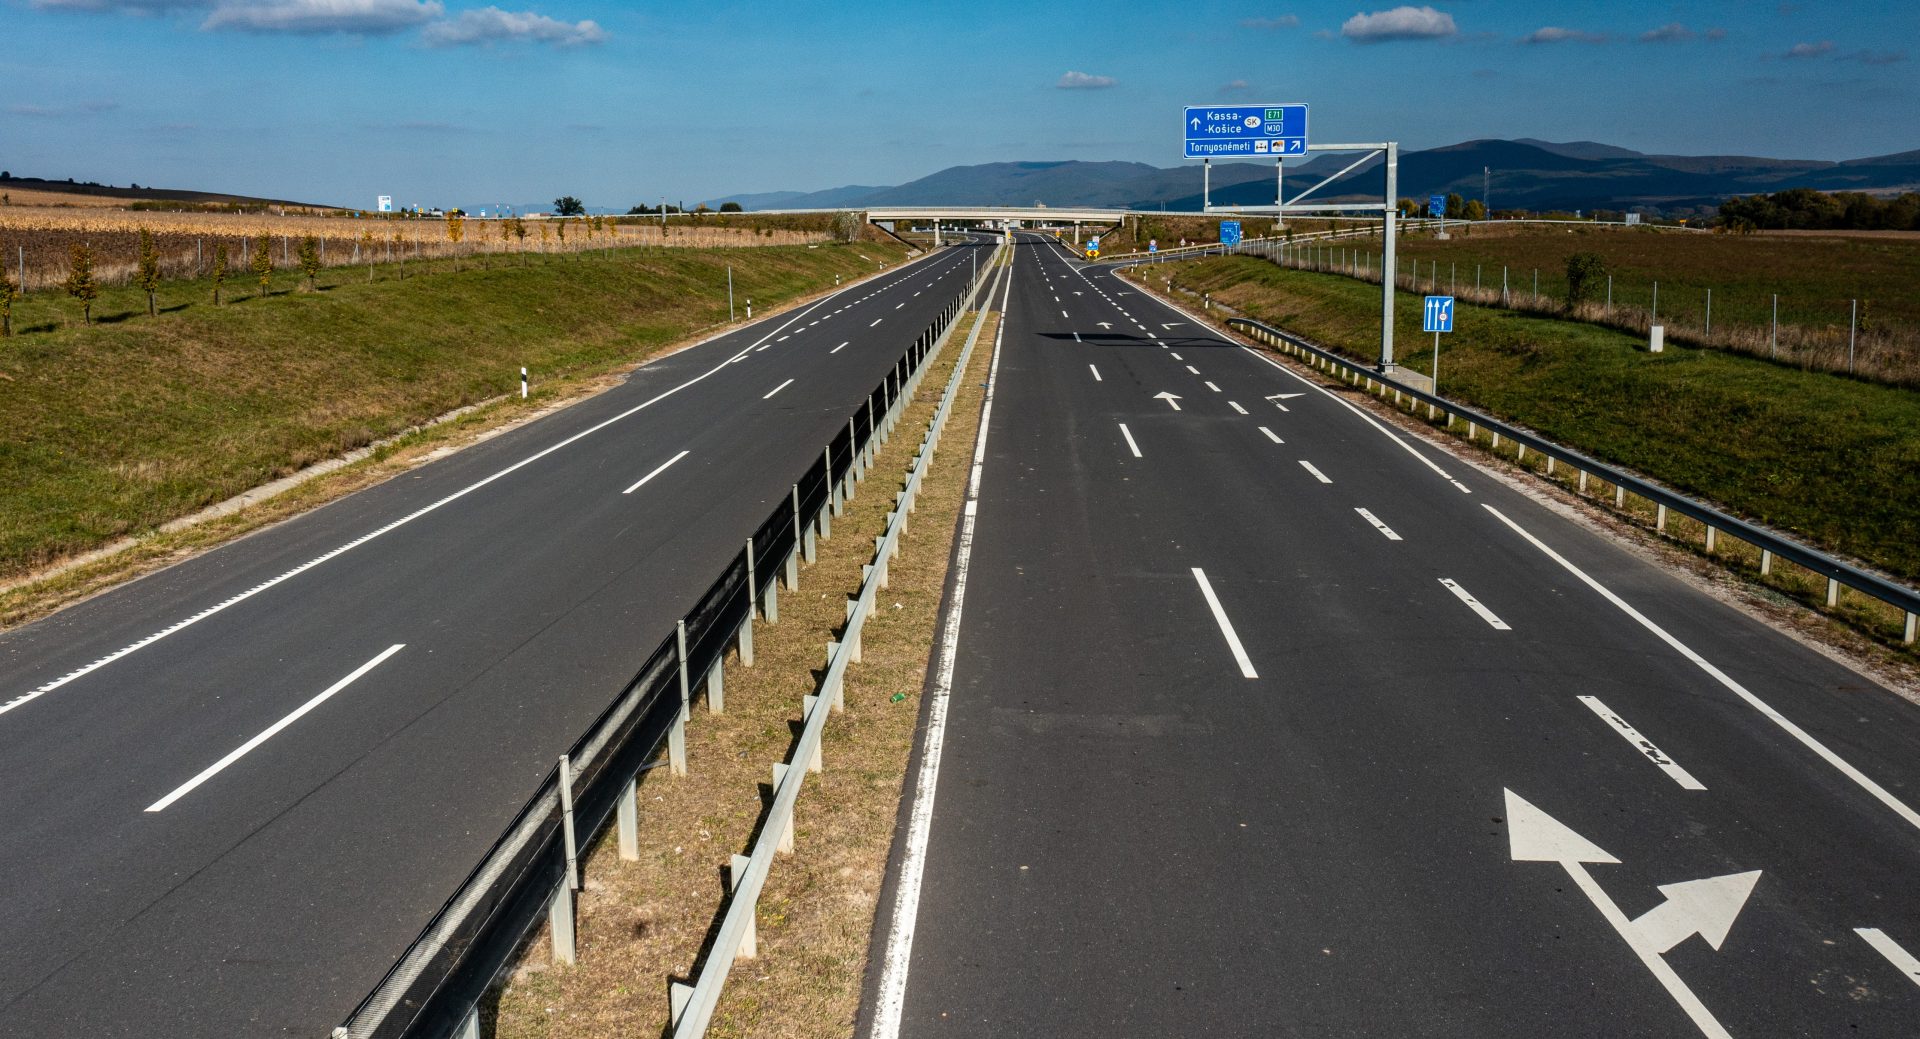 A highway connects Miskolc with the Slovak border